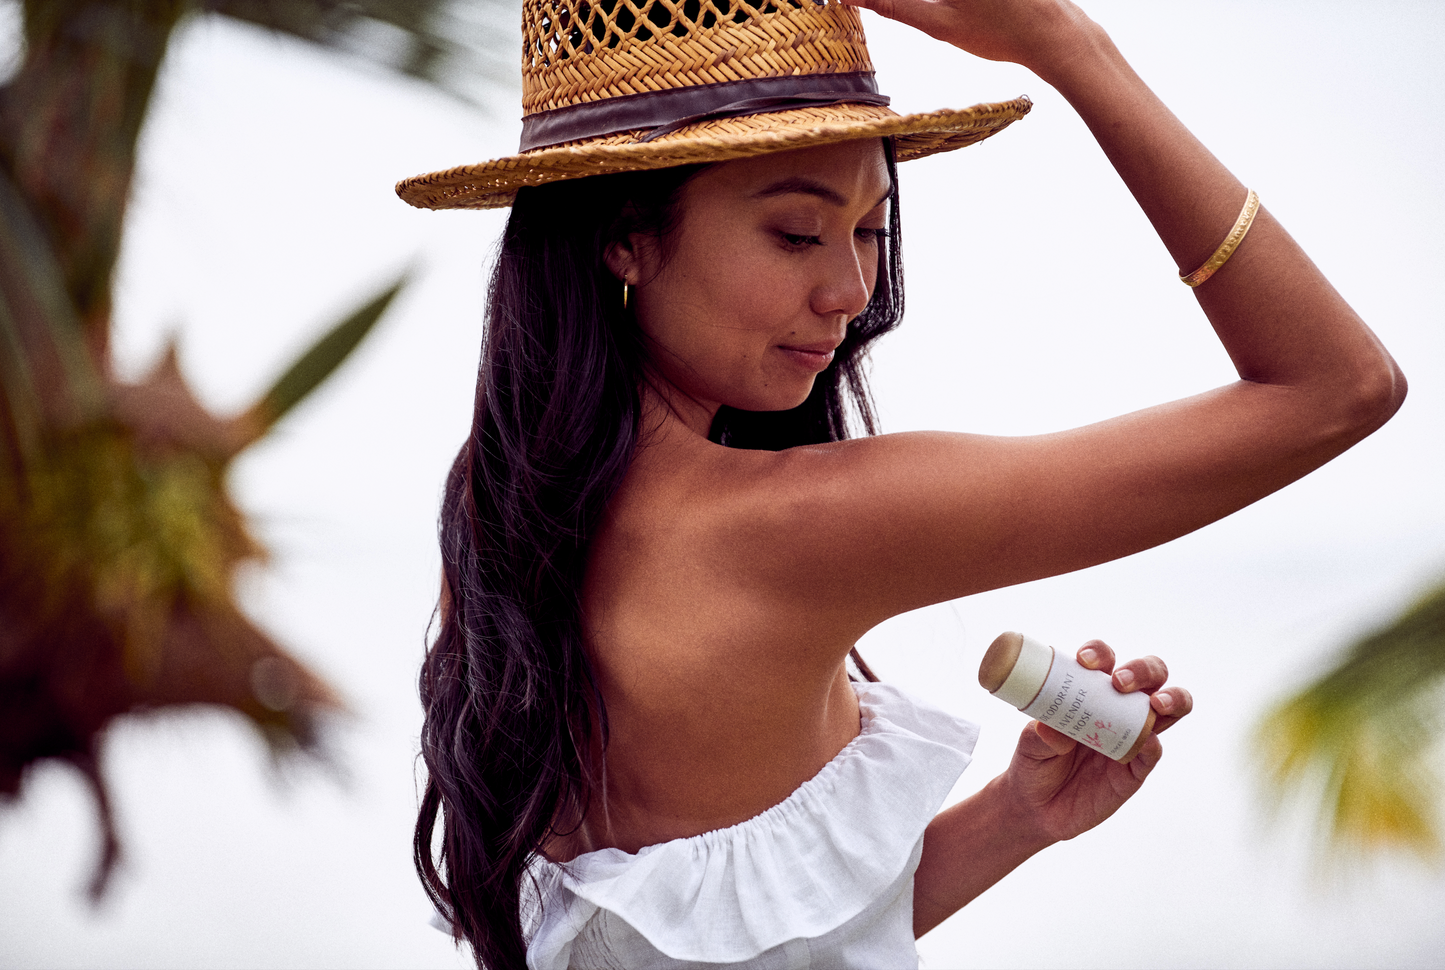 This image shows the Desesh plastic free aluminum free natural deodorant. In this image is the lavender and rose scent which uses essential oils. In the photo a women is applying the deodorant to her underarm and it is in a biodegradable push up cardboard tube